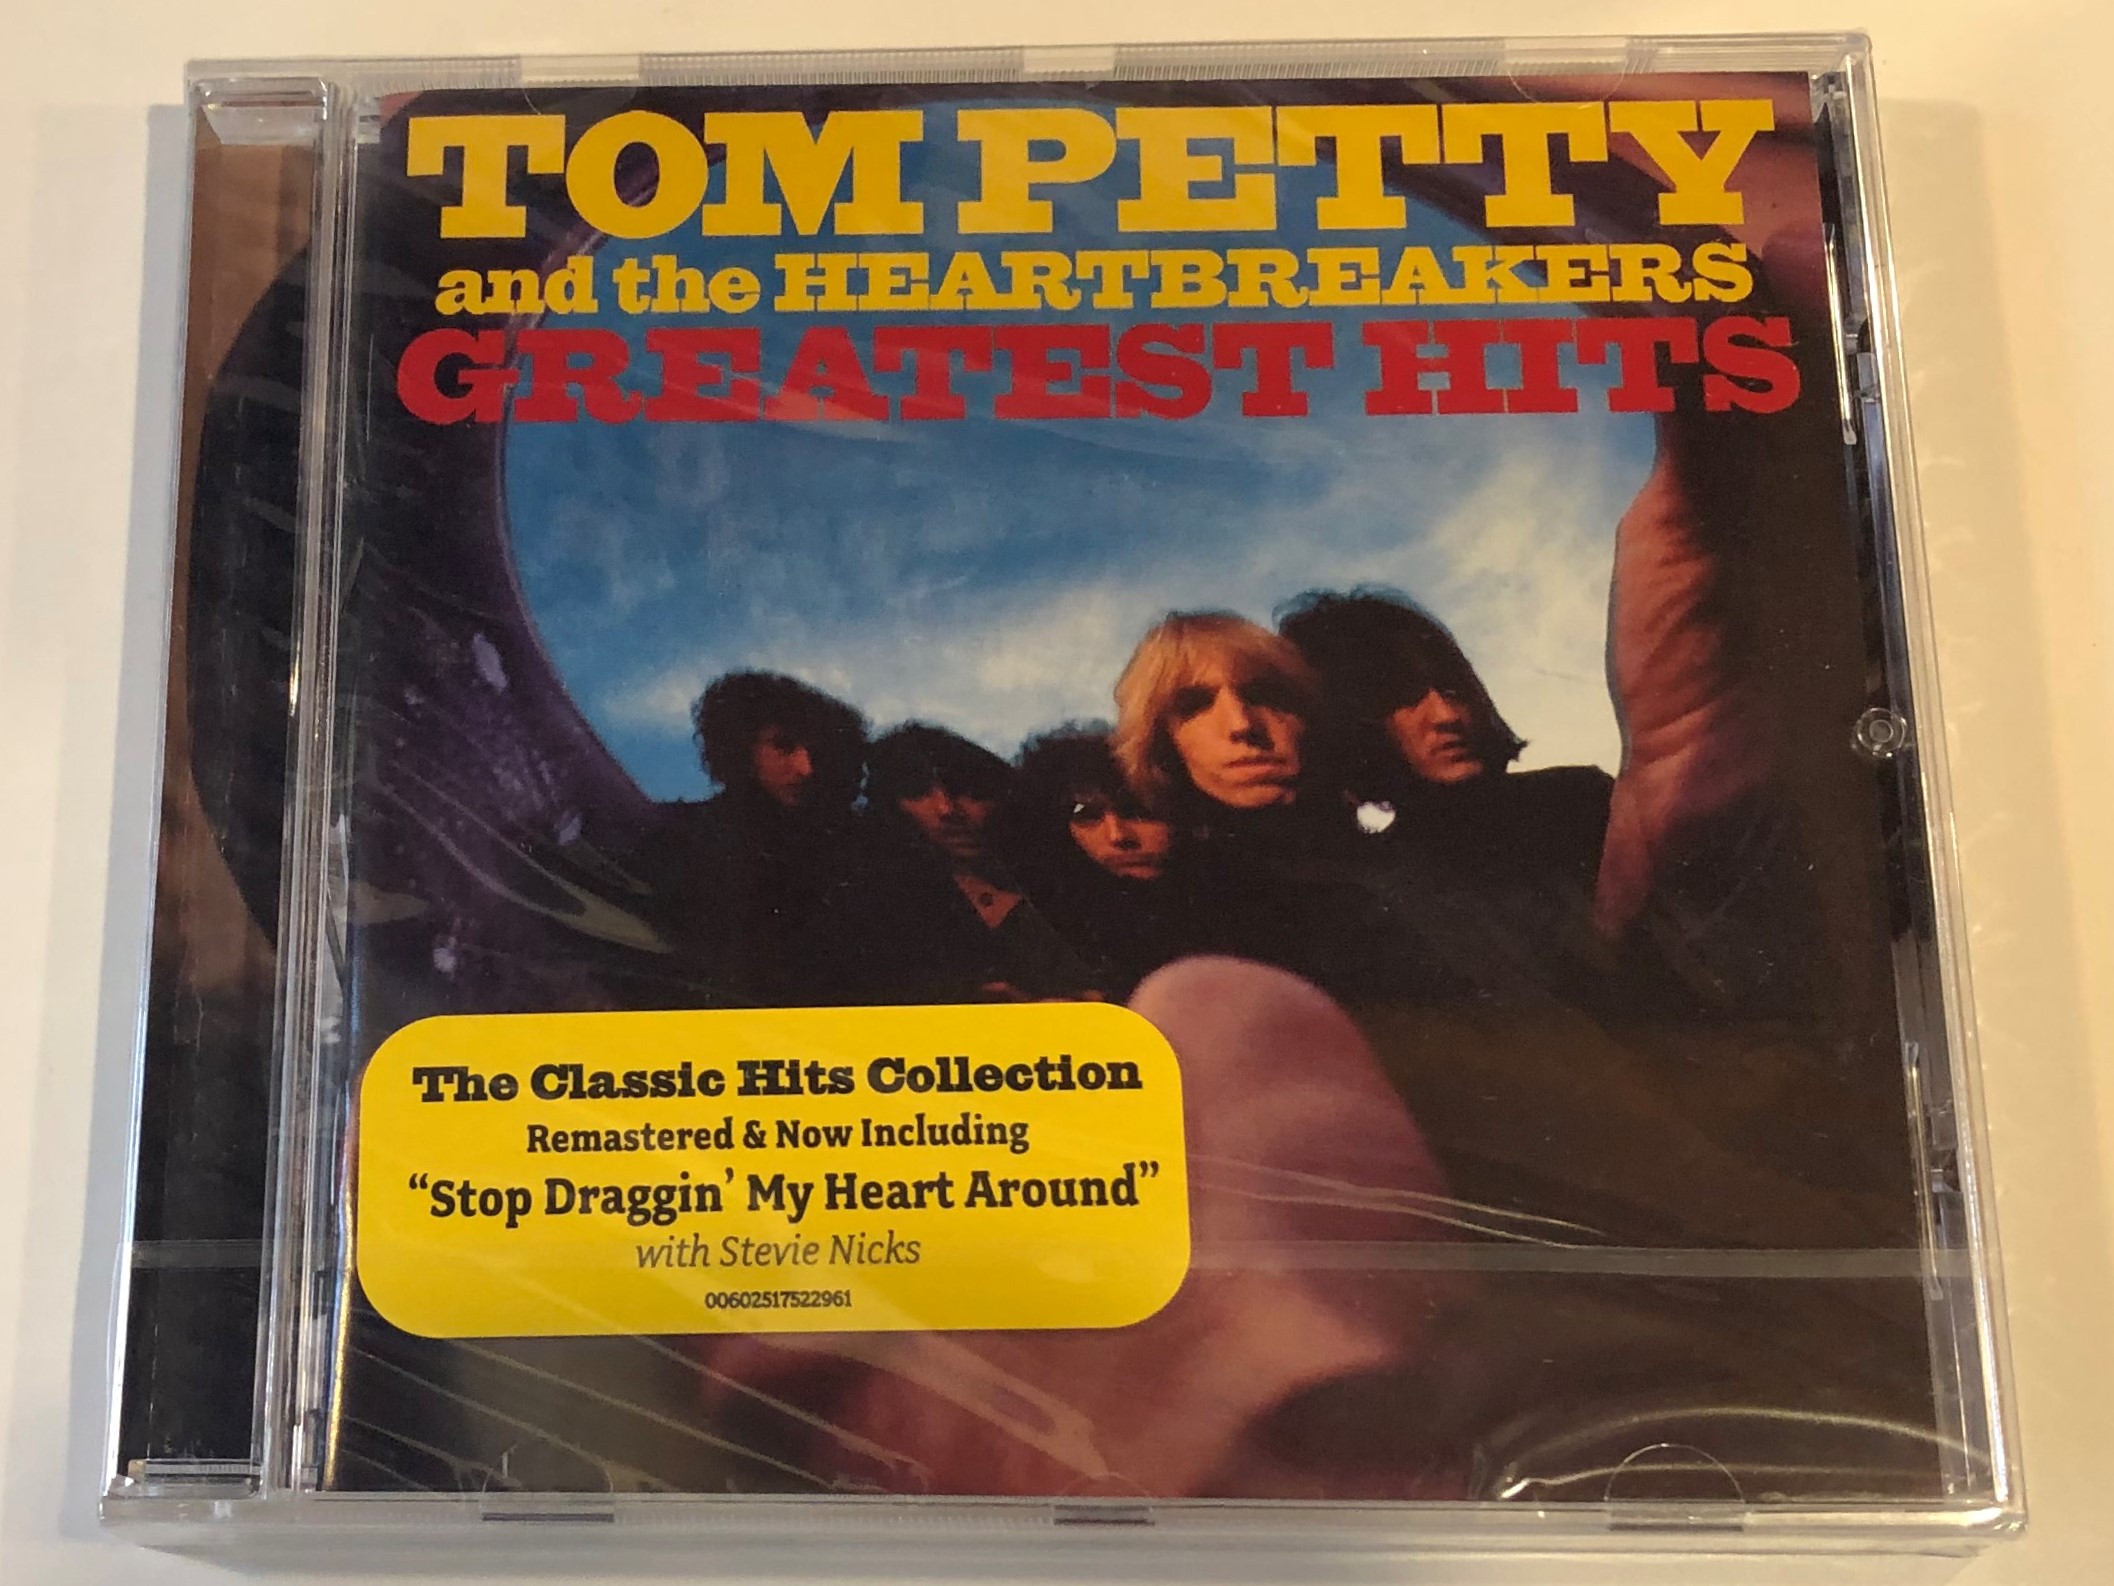 tom-petty-and-the-heartbreakers-greatest-hits-the-classic-hits-collection-remastered-now-including-stop-draggin-my-heart-around-with-stevie-nicks-geffen-records-audio-cd-2008-0060251-1-.jpg